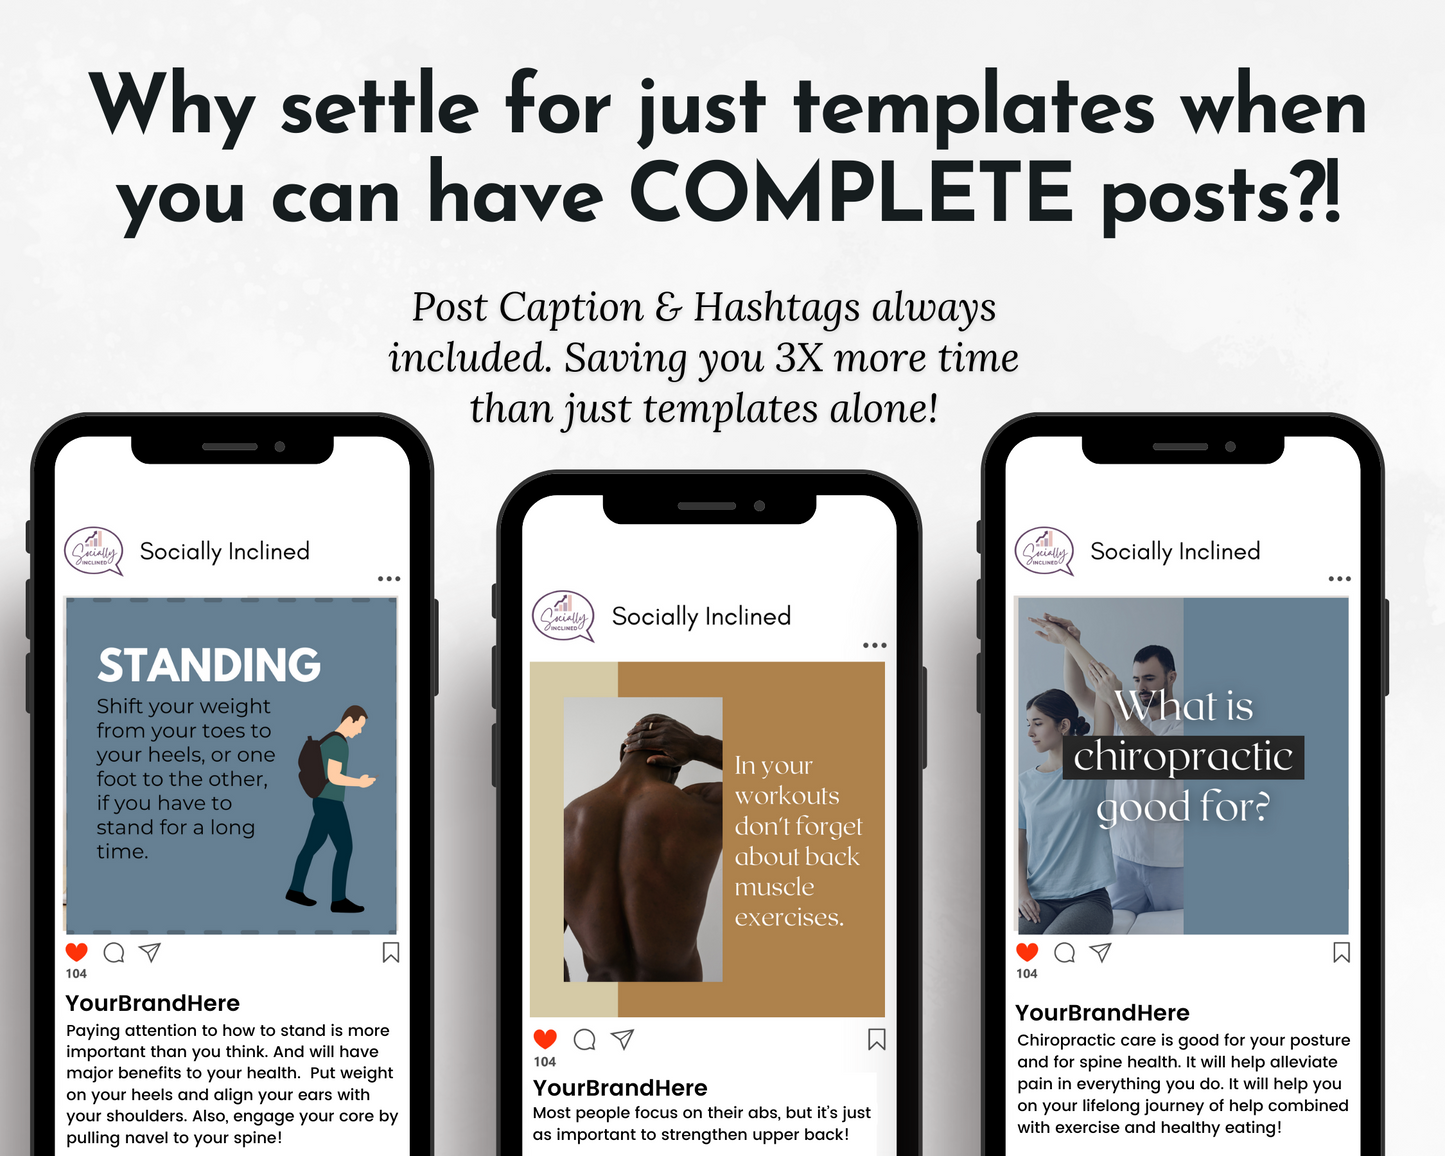 Four Chiropractic Social Media Post Bundles with Canva Templates from Socially Inclined with the text 'select just when you can complete post?' for chiropractic business.